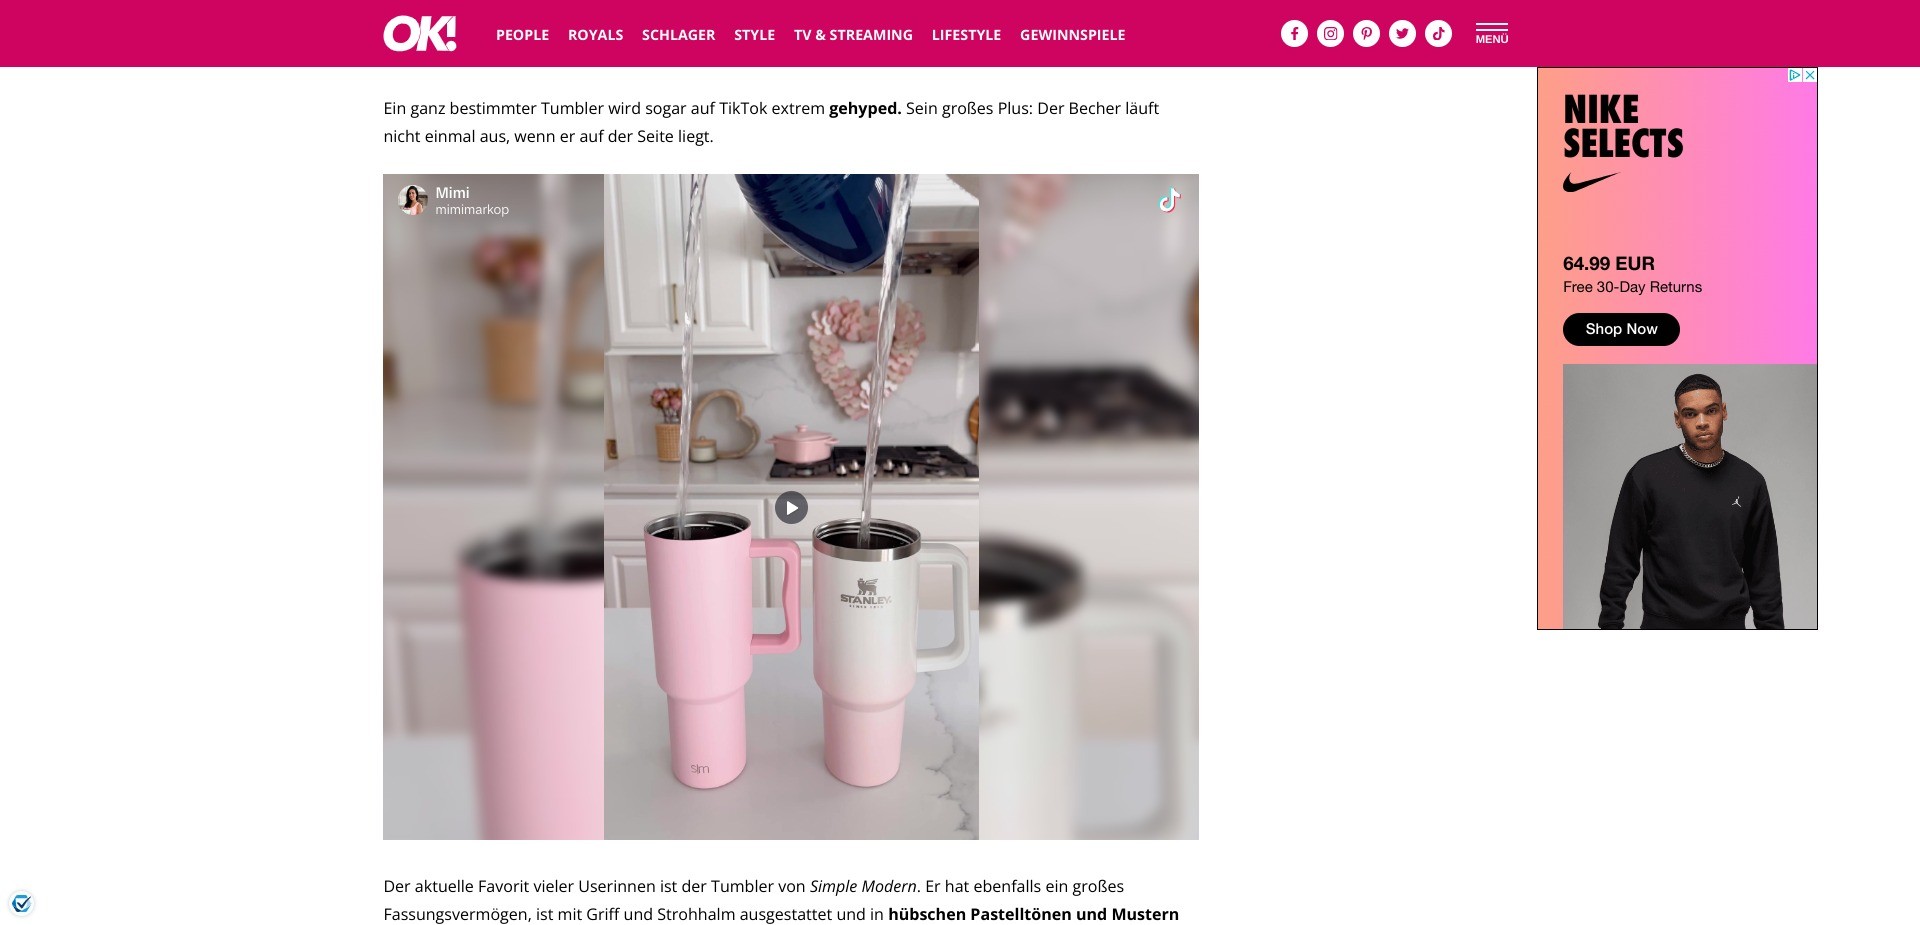 Screenshot of a still image from a TikTok video on https://www.ok-magazin.de/lifestyle/stanley-adventure-quencher-so-shoppst-du-den-beliebten-tumbler-deutschland-86900.html comparing the branded Stanley Quencher cup and its cheaper dupe